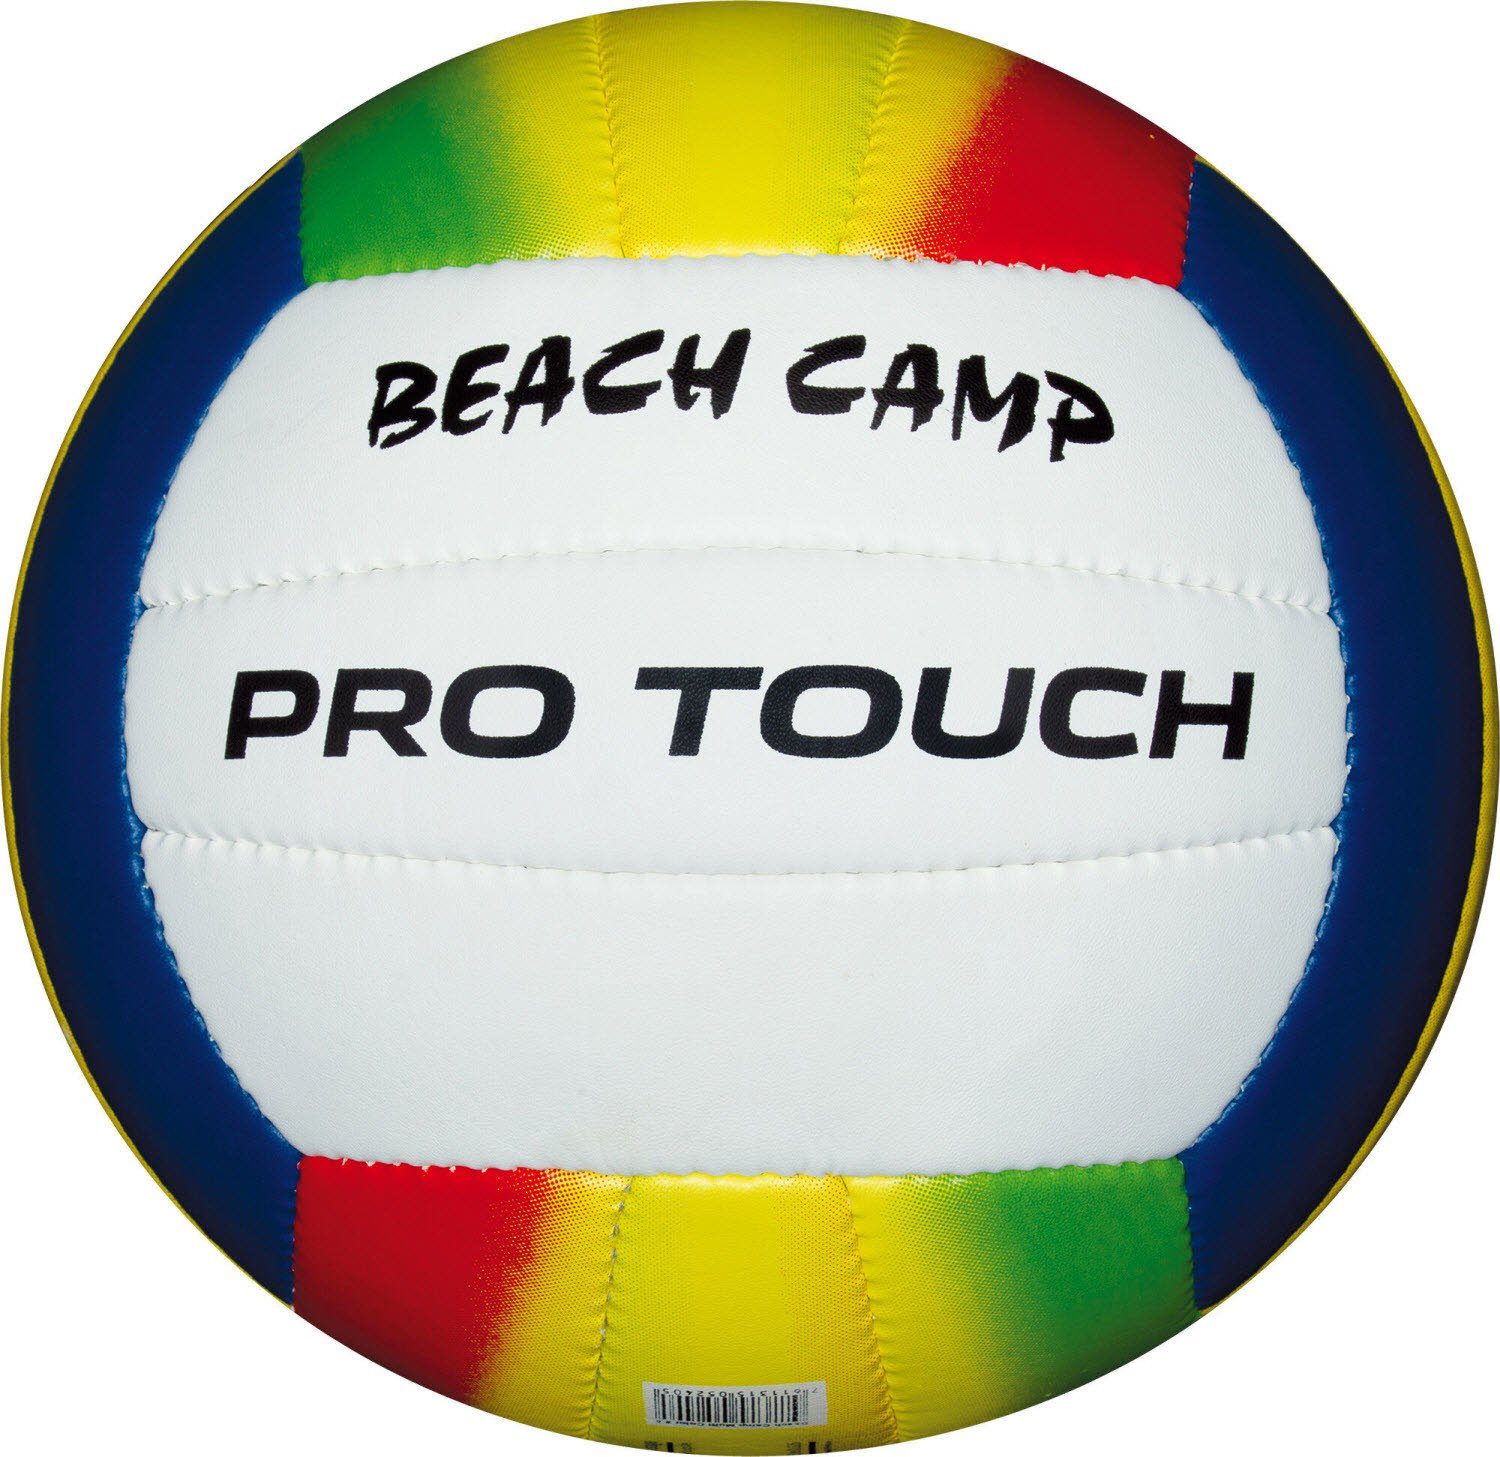 Pro Touch Volleyball Beach-Volleyball Beach Camp